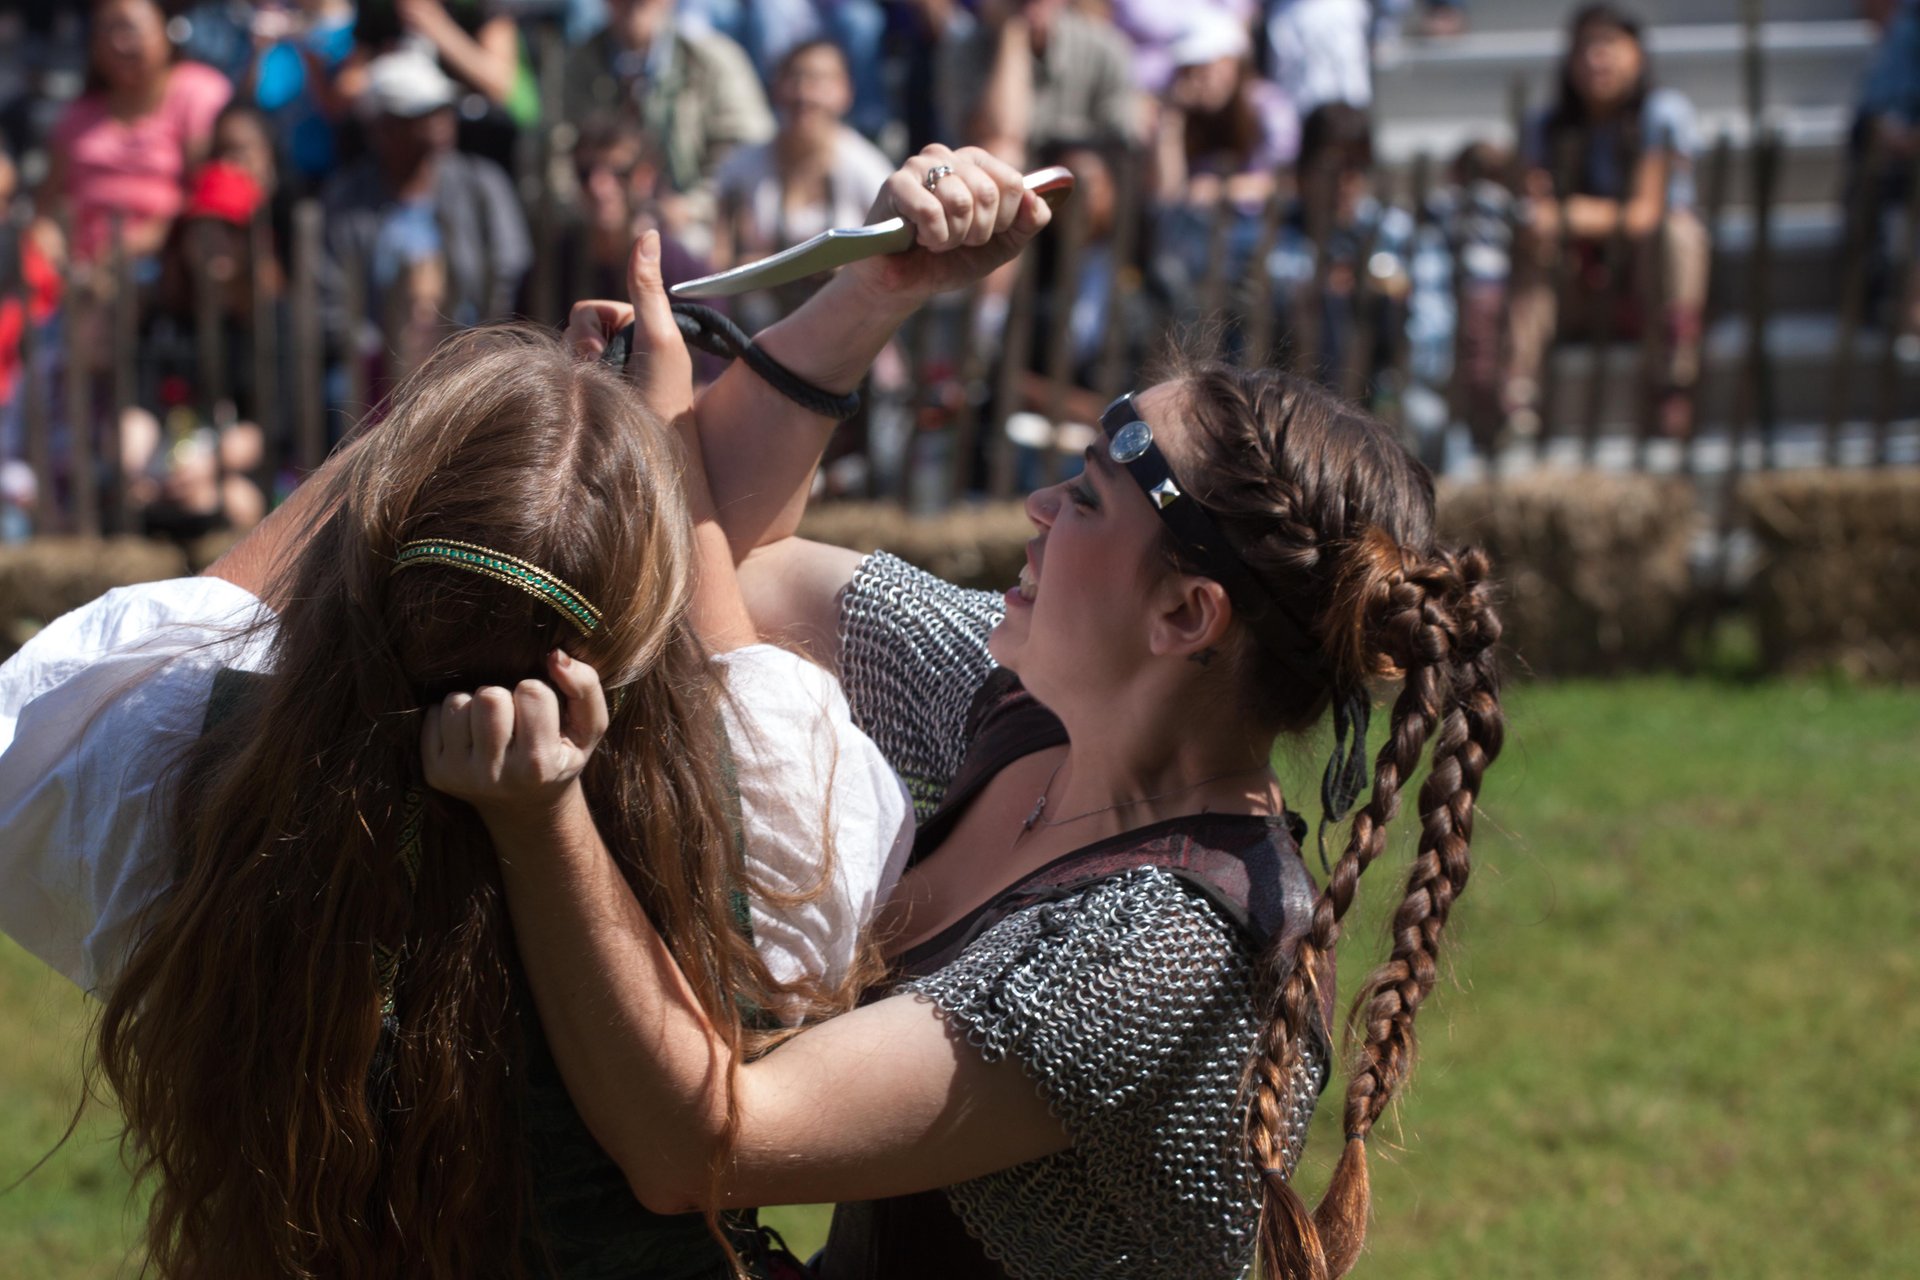 Medieval Festival at Fort Tryon Park